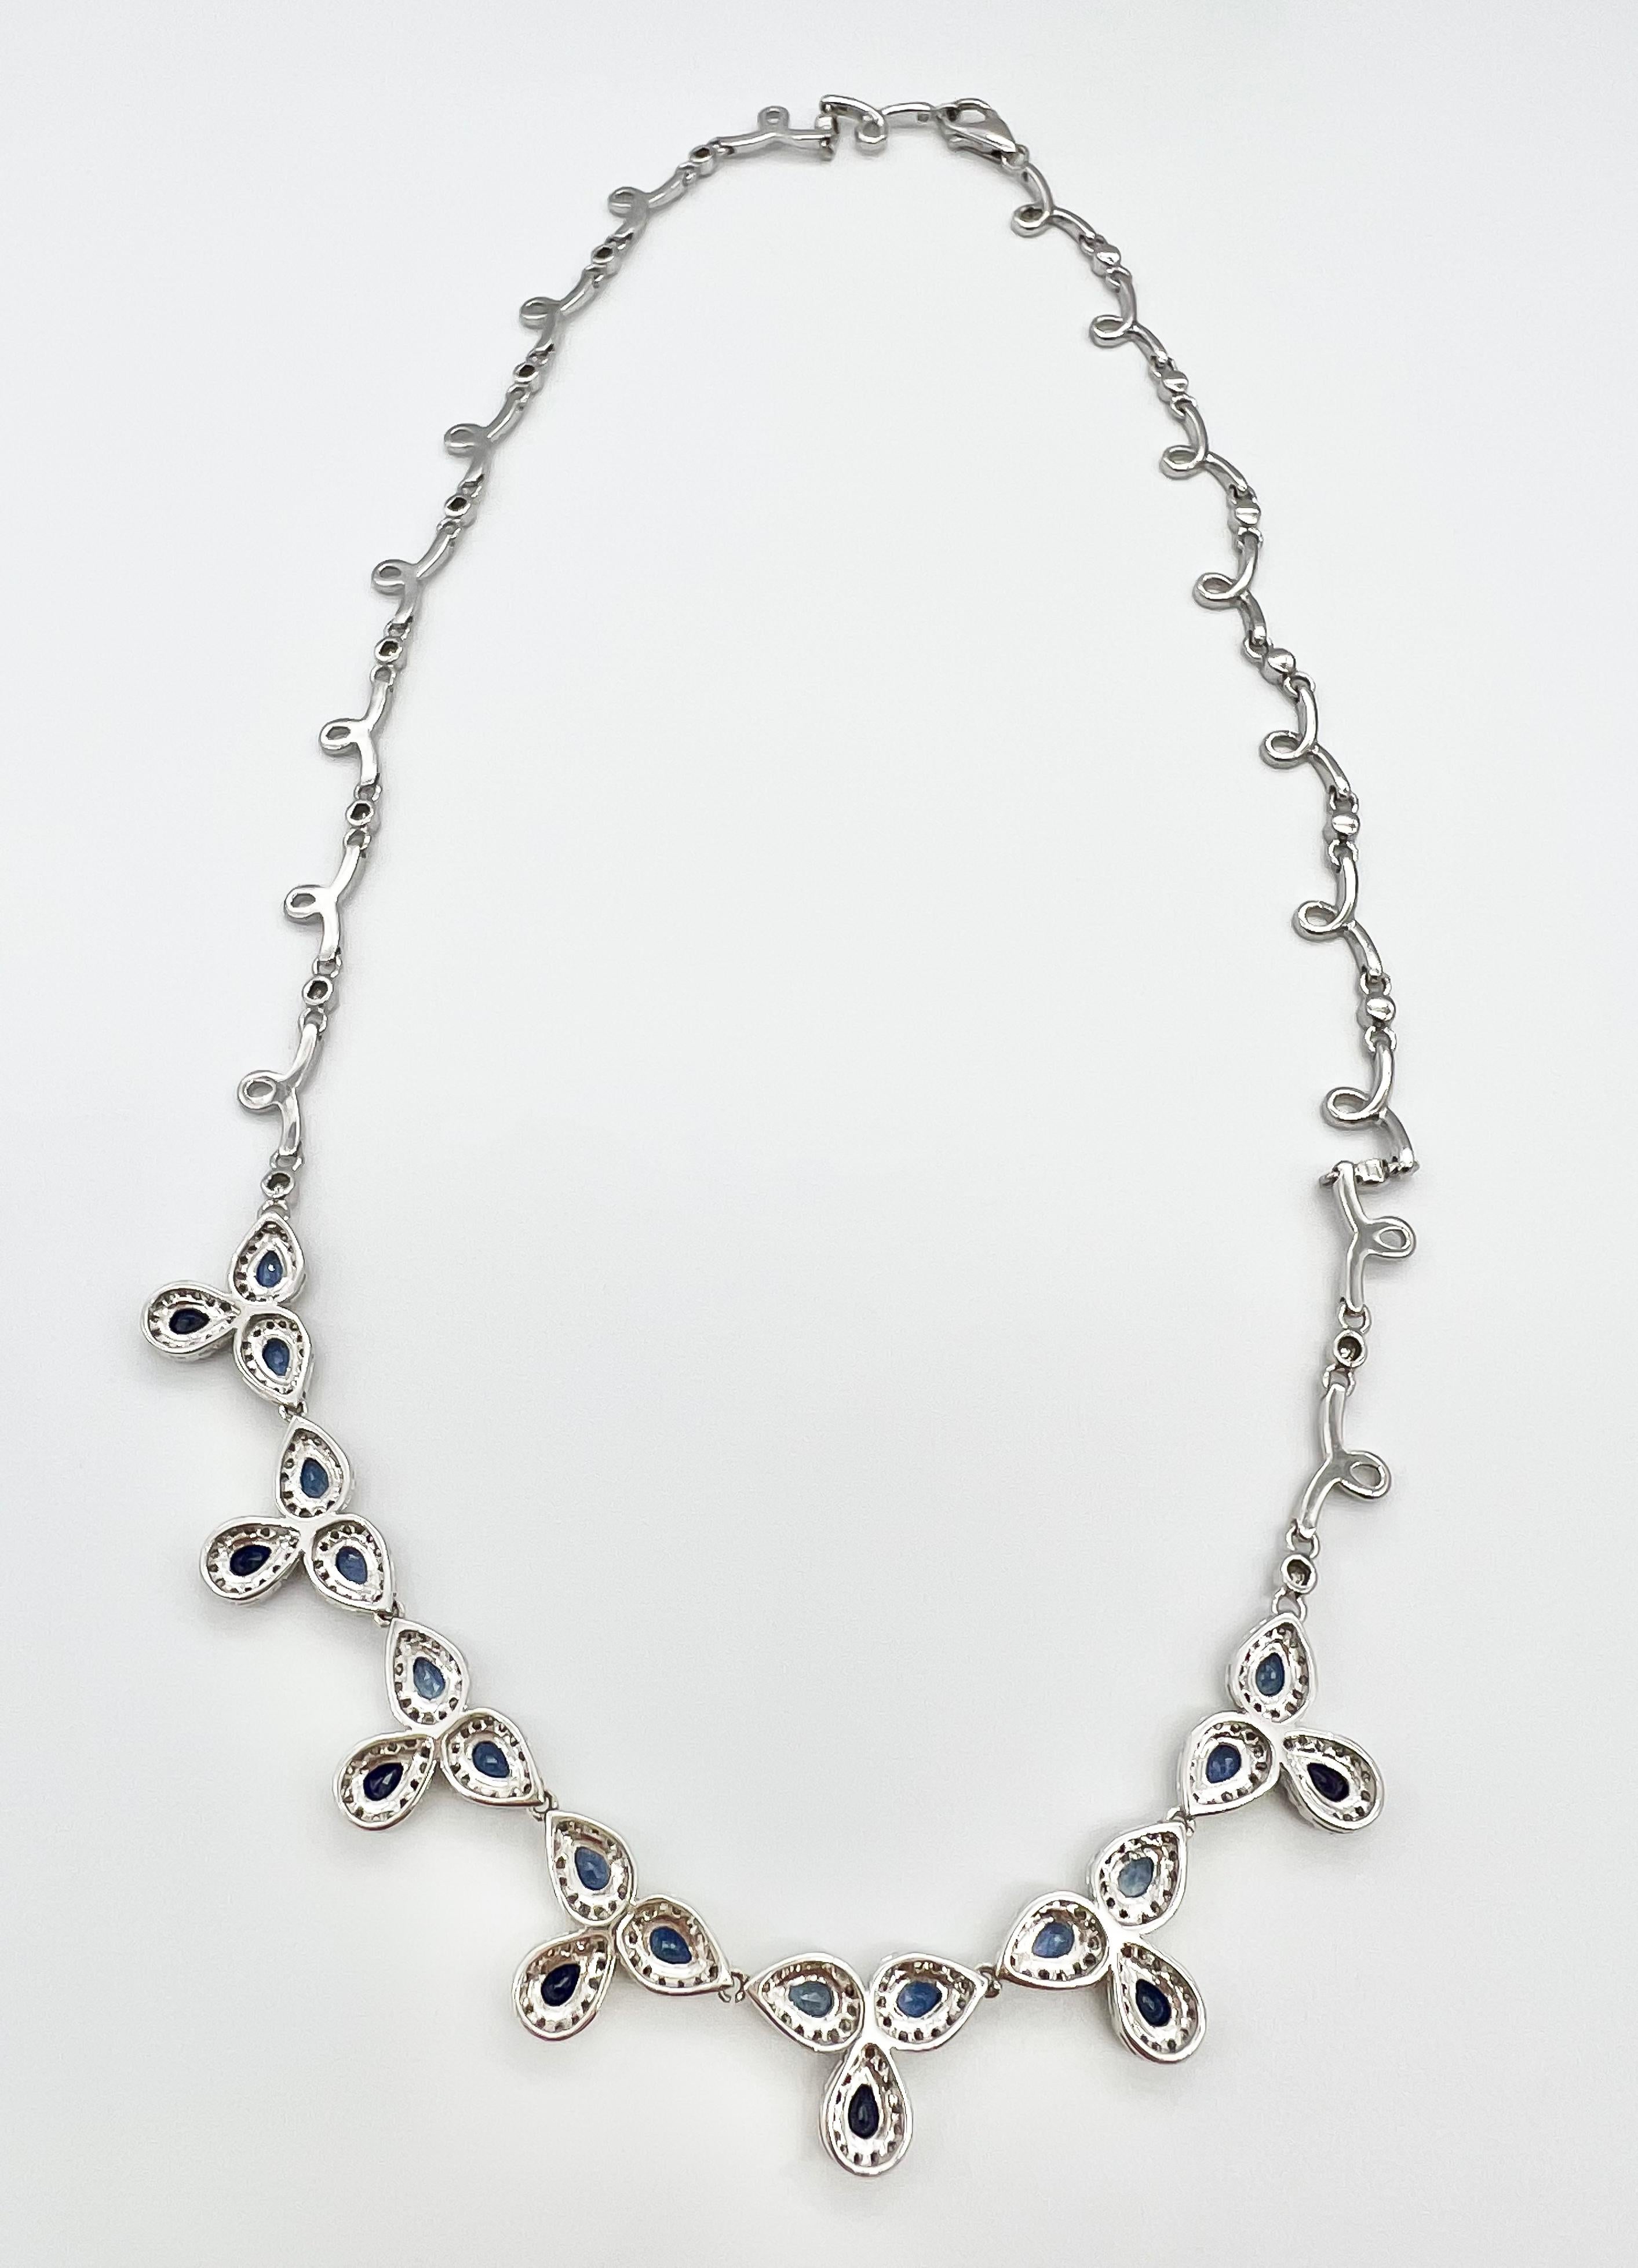 Women's or Men's 8.70 Total Carat Fancy Sapphire and Diamond, White Gold Necklace For Sale